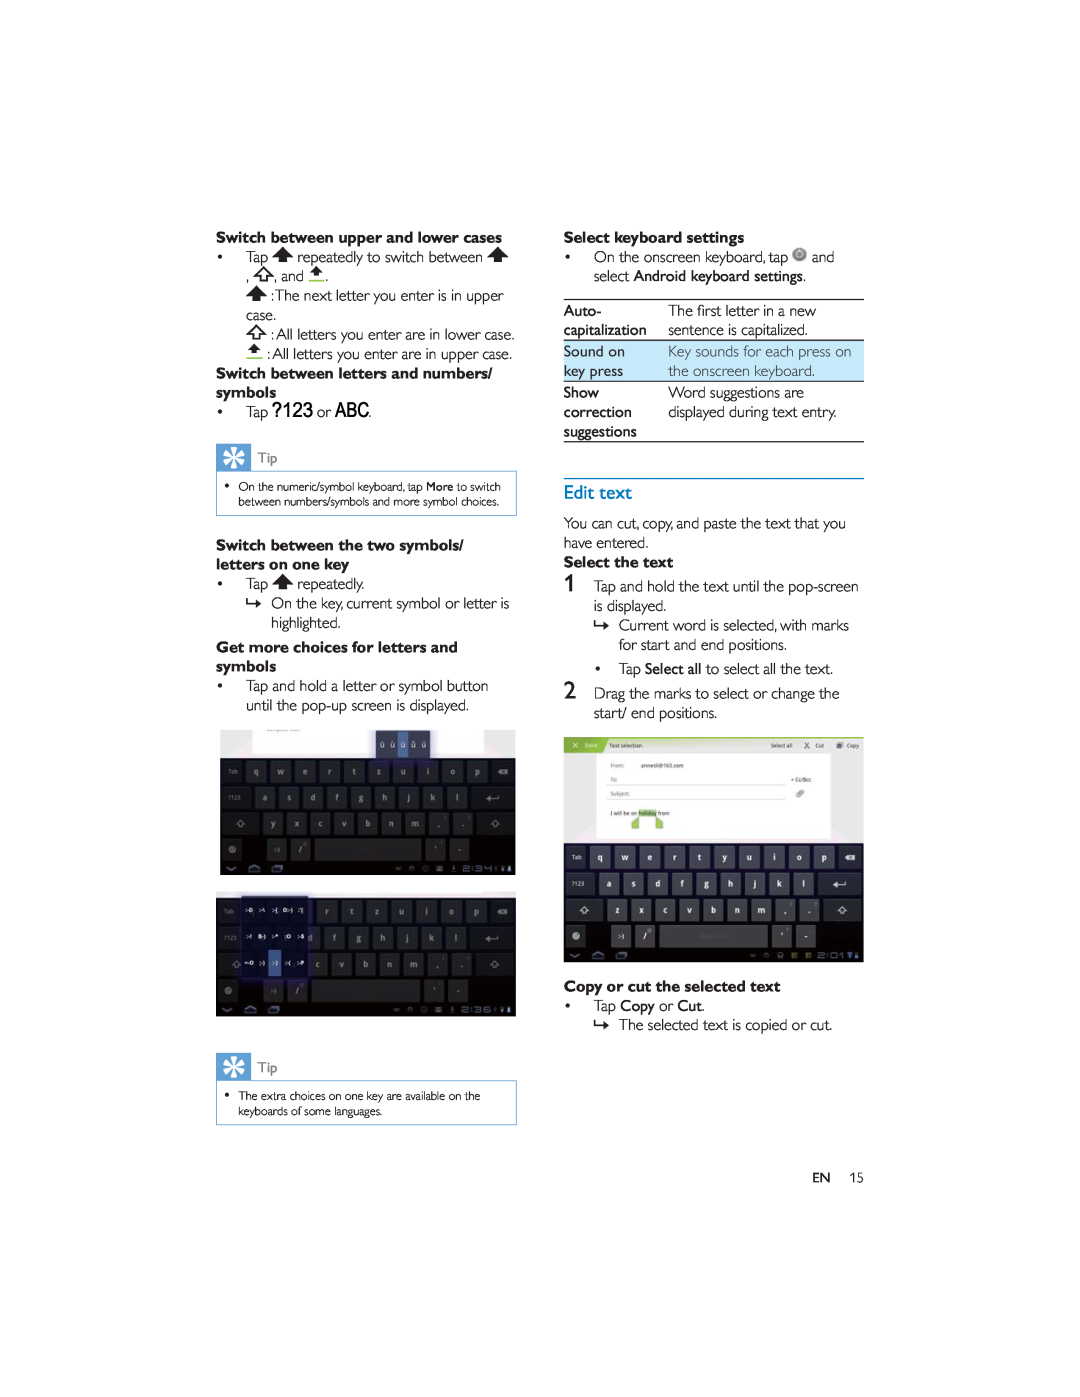 Philips PI7000/93 user manual Edit text, Switch between upper and lower cases, Switch between letters and numbers/ symbols 